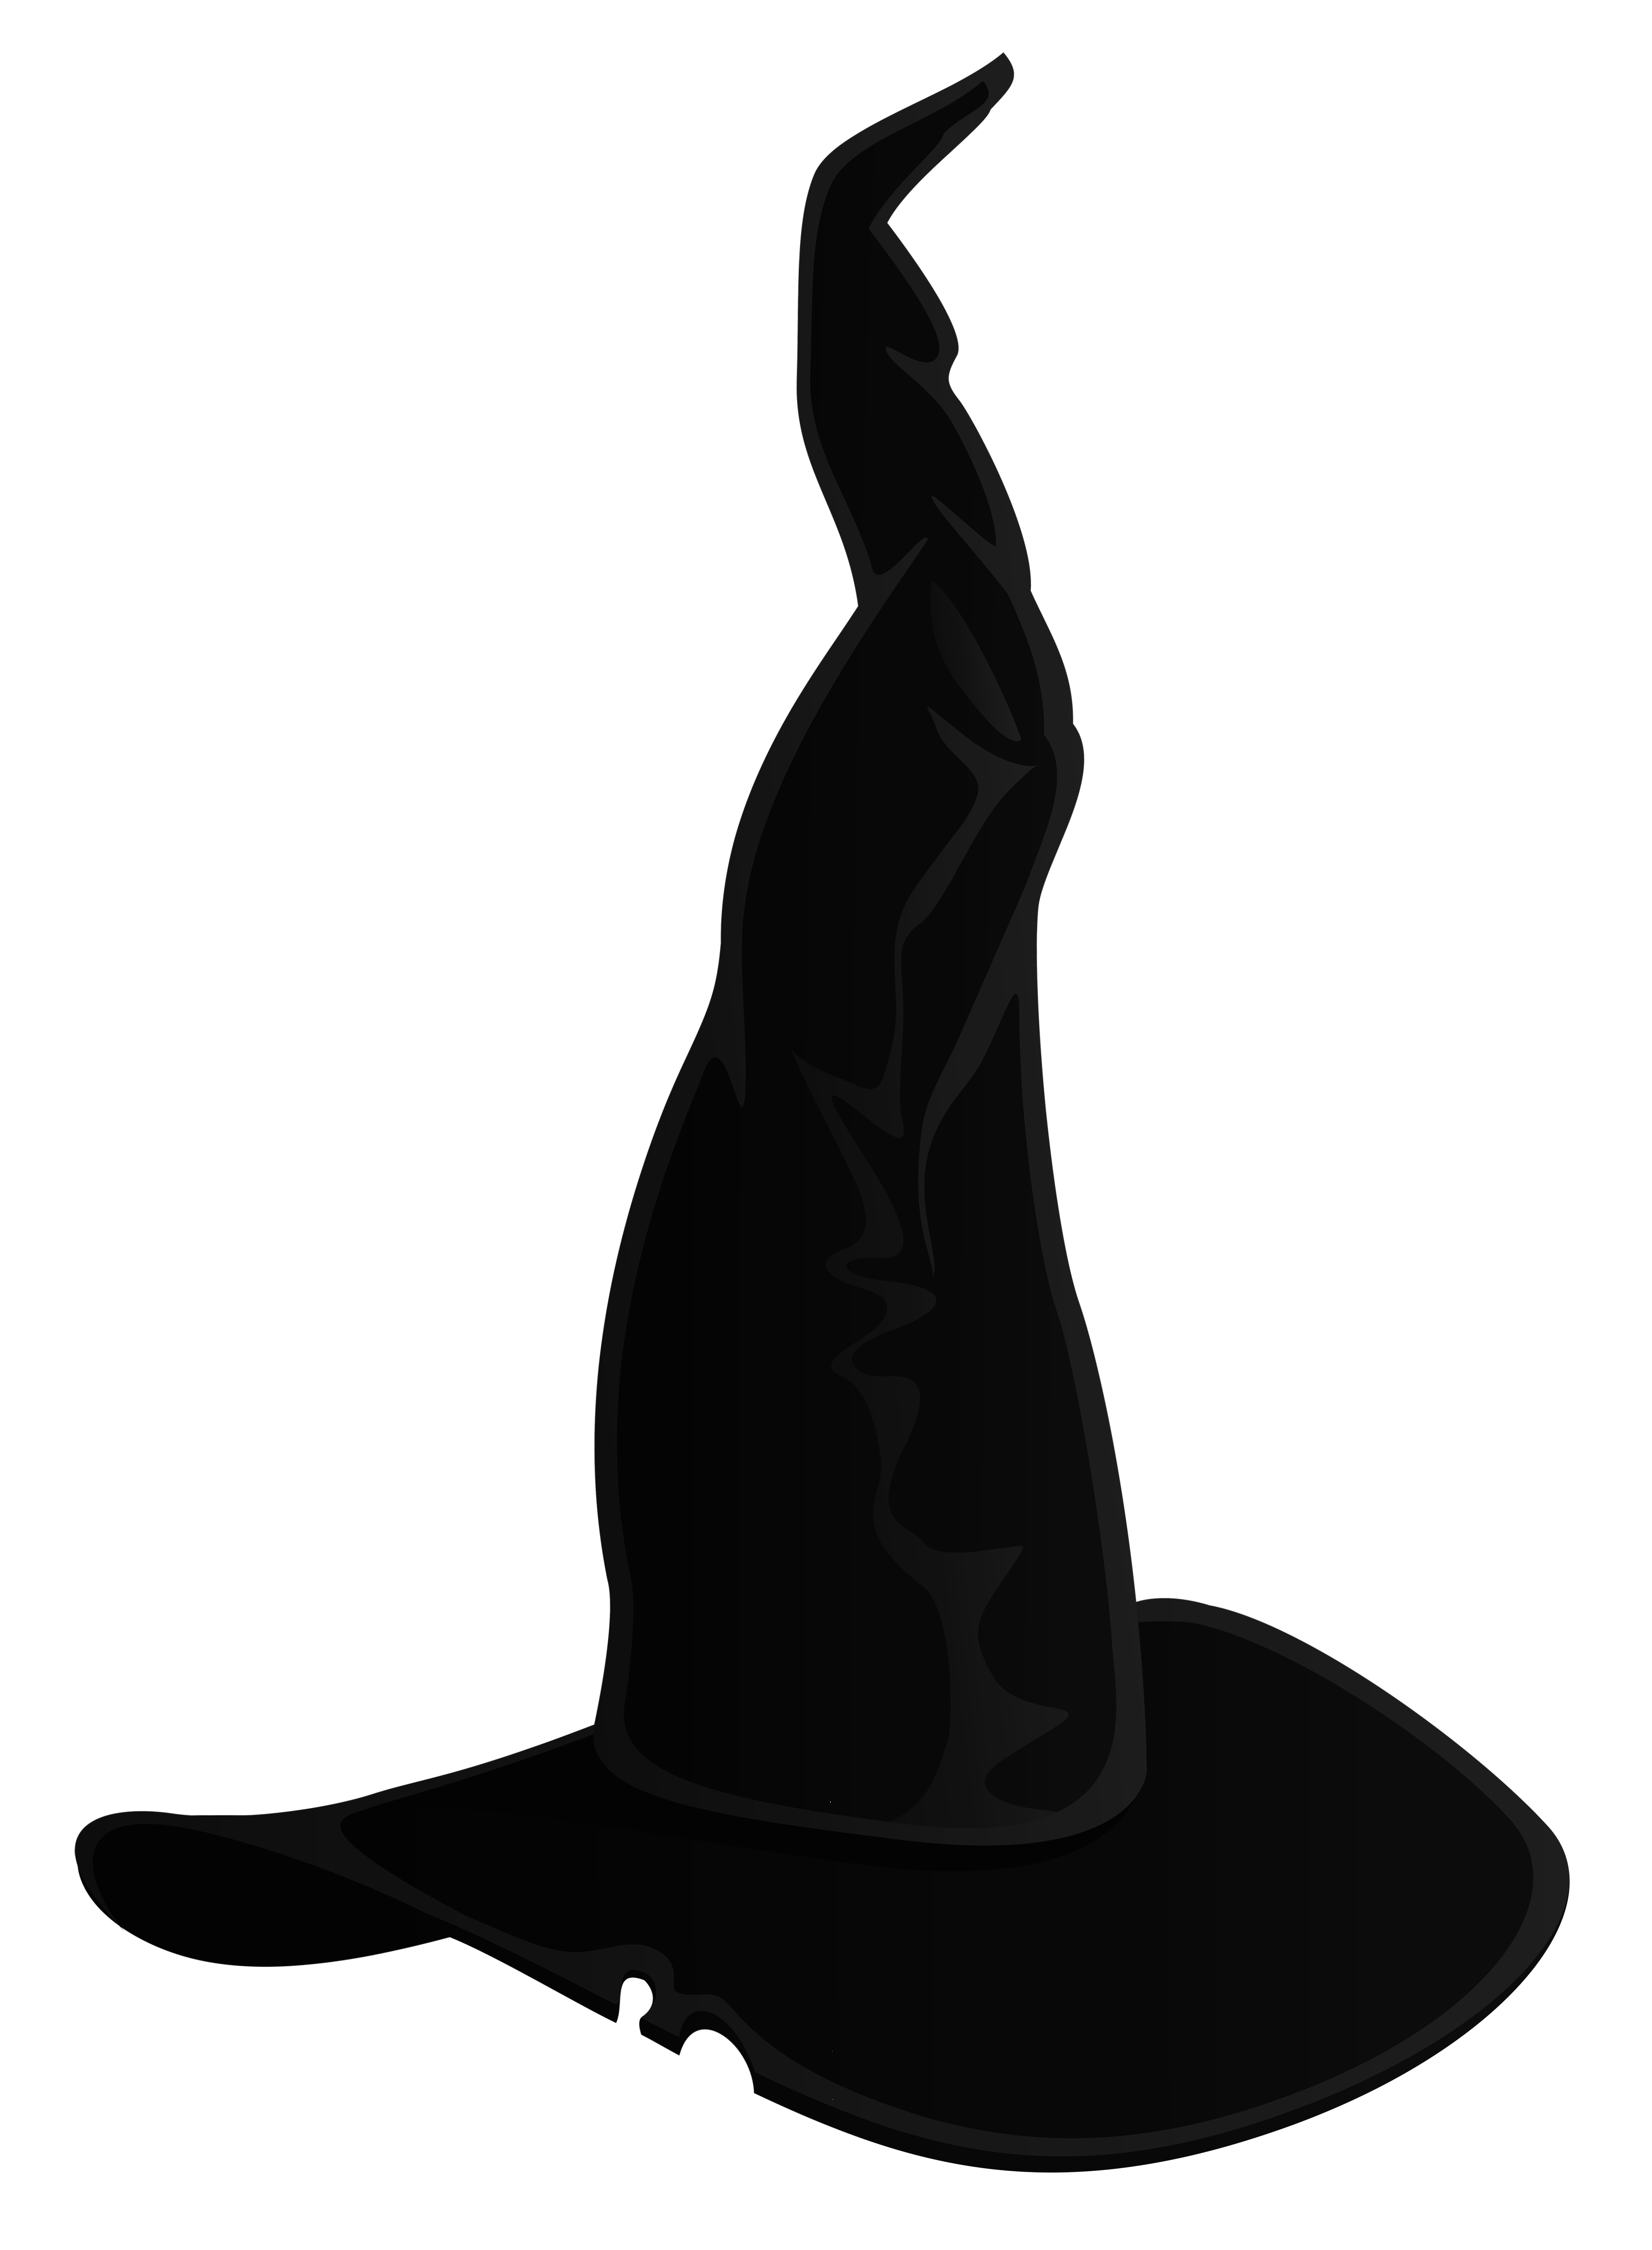 Large black hat transparent. Witch clipart witch head